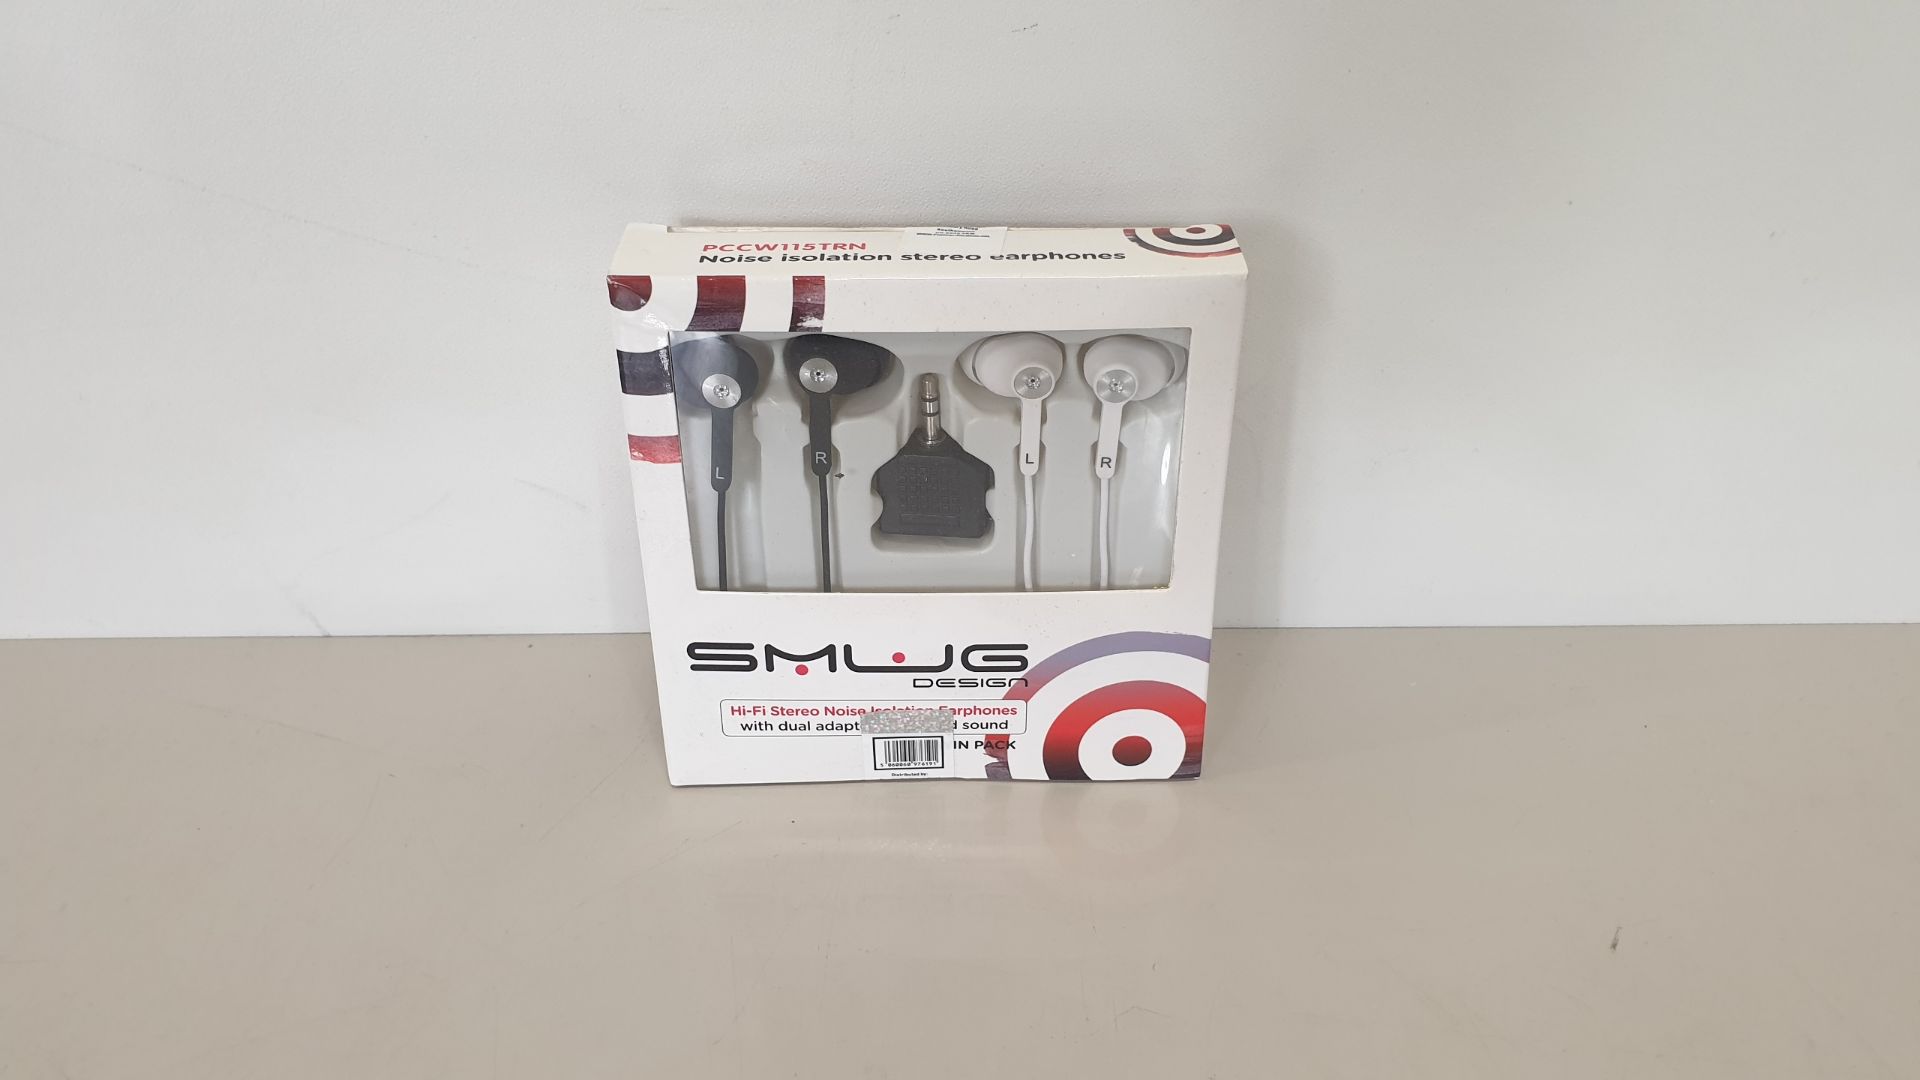 50 X SMUG DESIGN TWIN PACK HI FI STEREO NOISE ISOLATION EARPHONES WITH DUAL ADAPTOR FOR SHARED SOUND